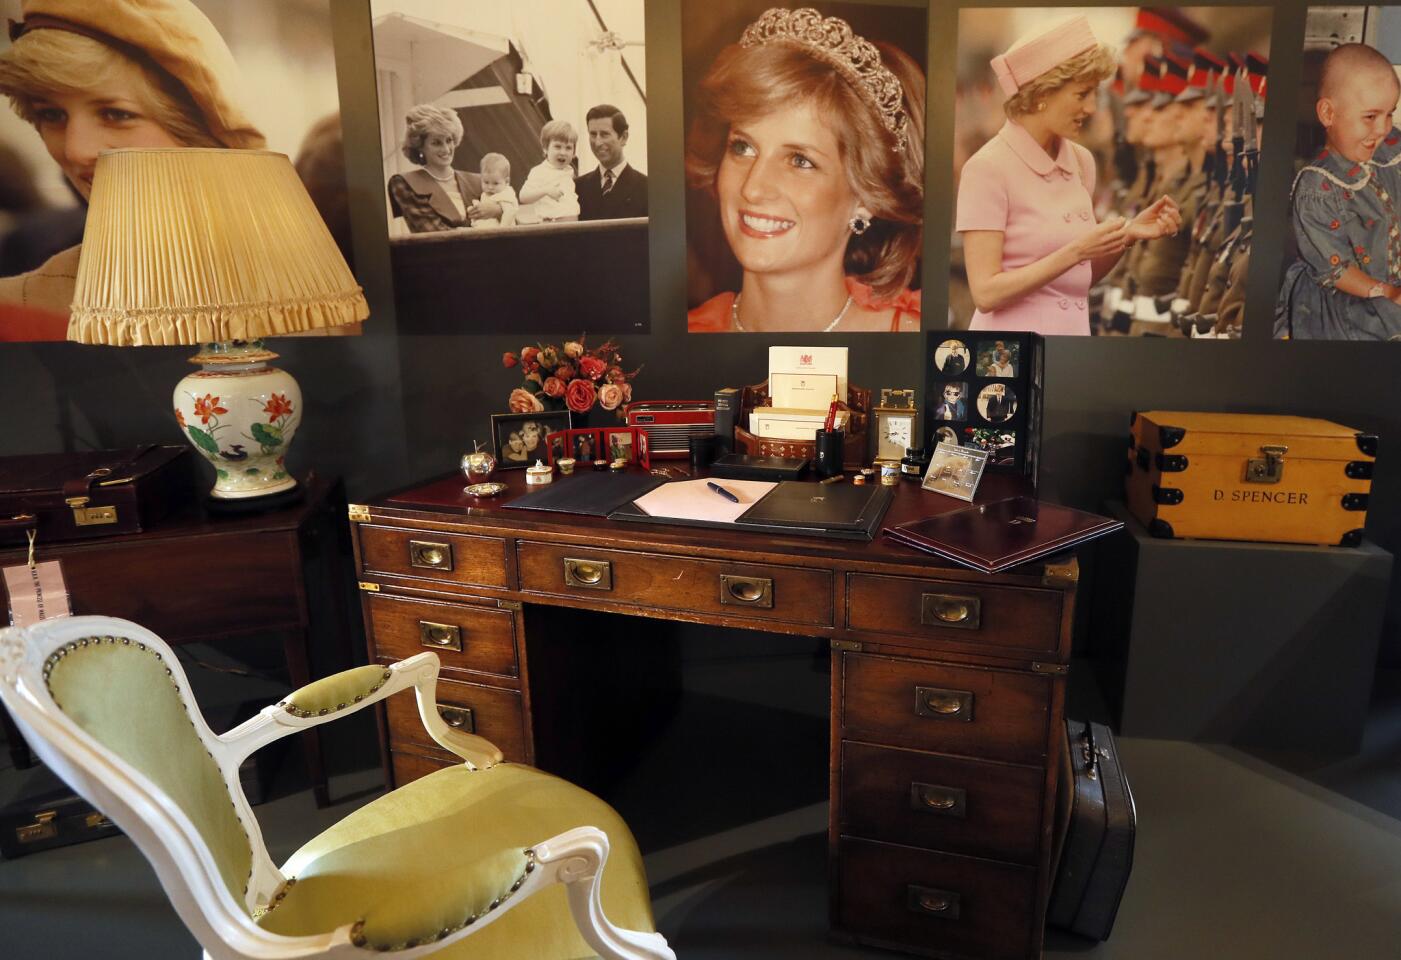 A display to mark the 20th anniversary of the death of Britain's Diana, Princess of Wales, a recreation of the desk where Princess Diana worked in her Sitting room at Kensington Palace, on display at Buckingham Palace in London, Thursday, July 20, 2017. Summer visitors to the State Rooms at Buckingham Palace will also be able to see a display of over 200 gifts presented to Her Majesty The Queen over her 65 year reign. (AP Photo/Kirsty Wigglesworth)